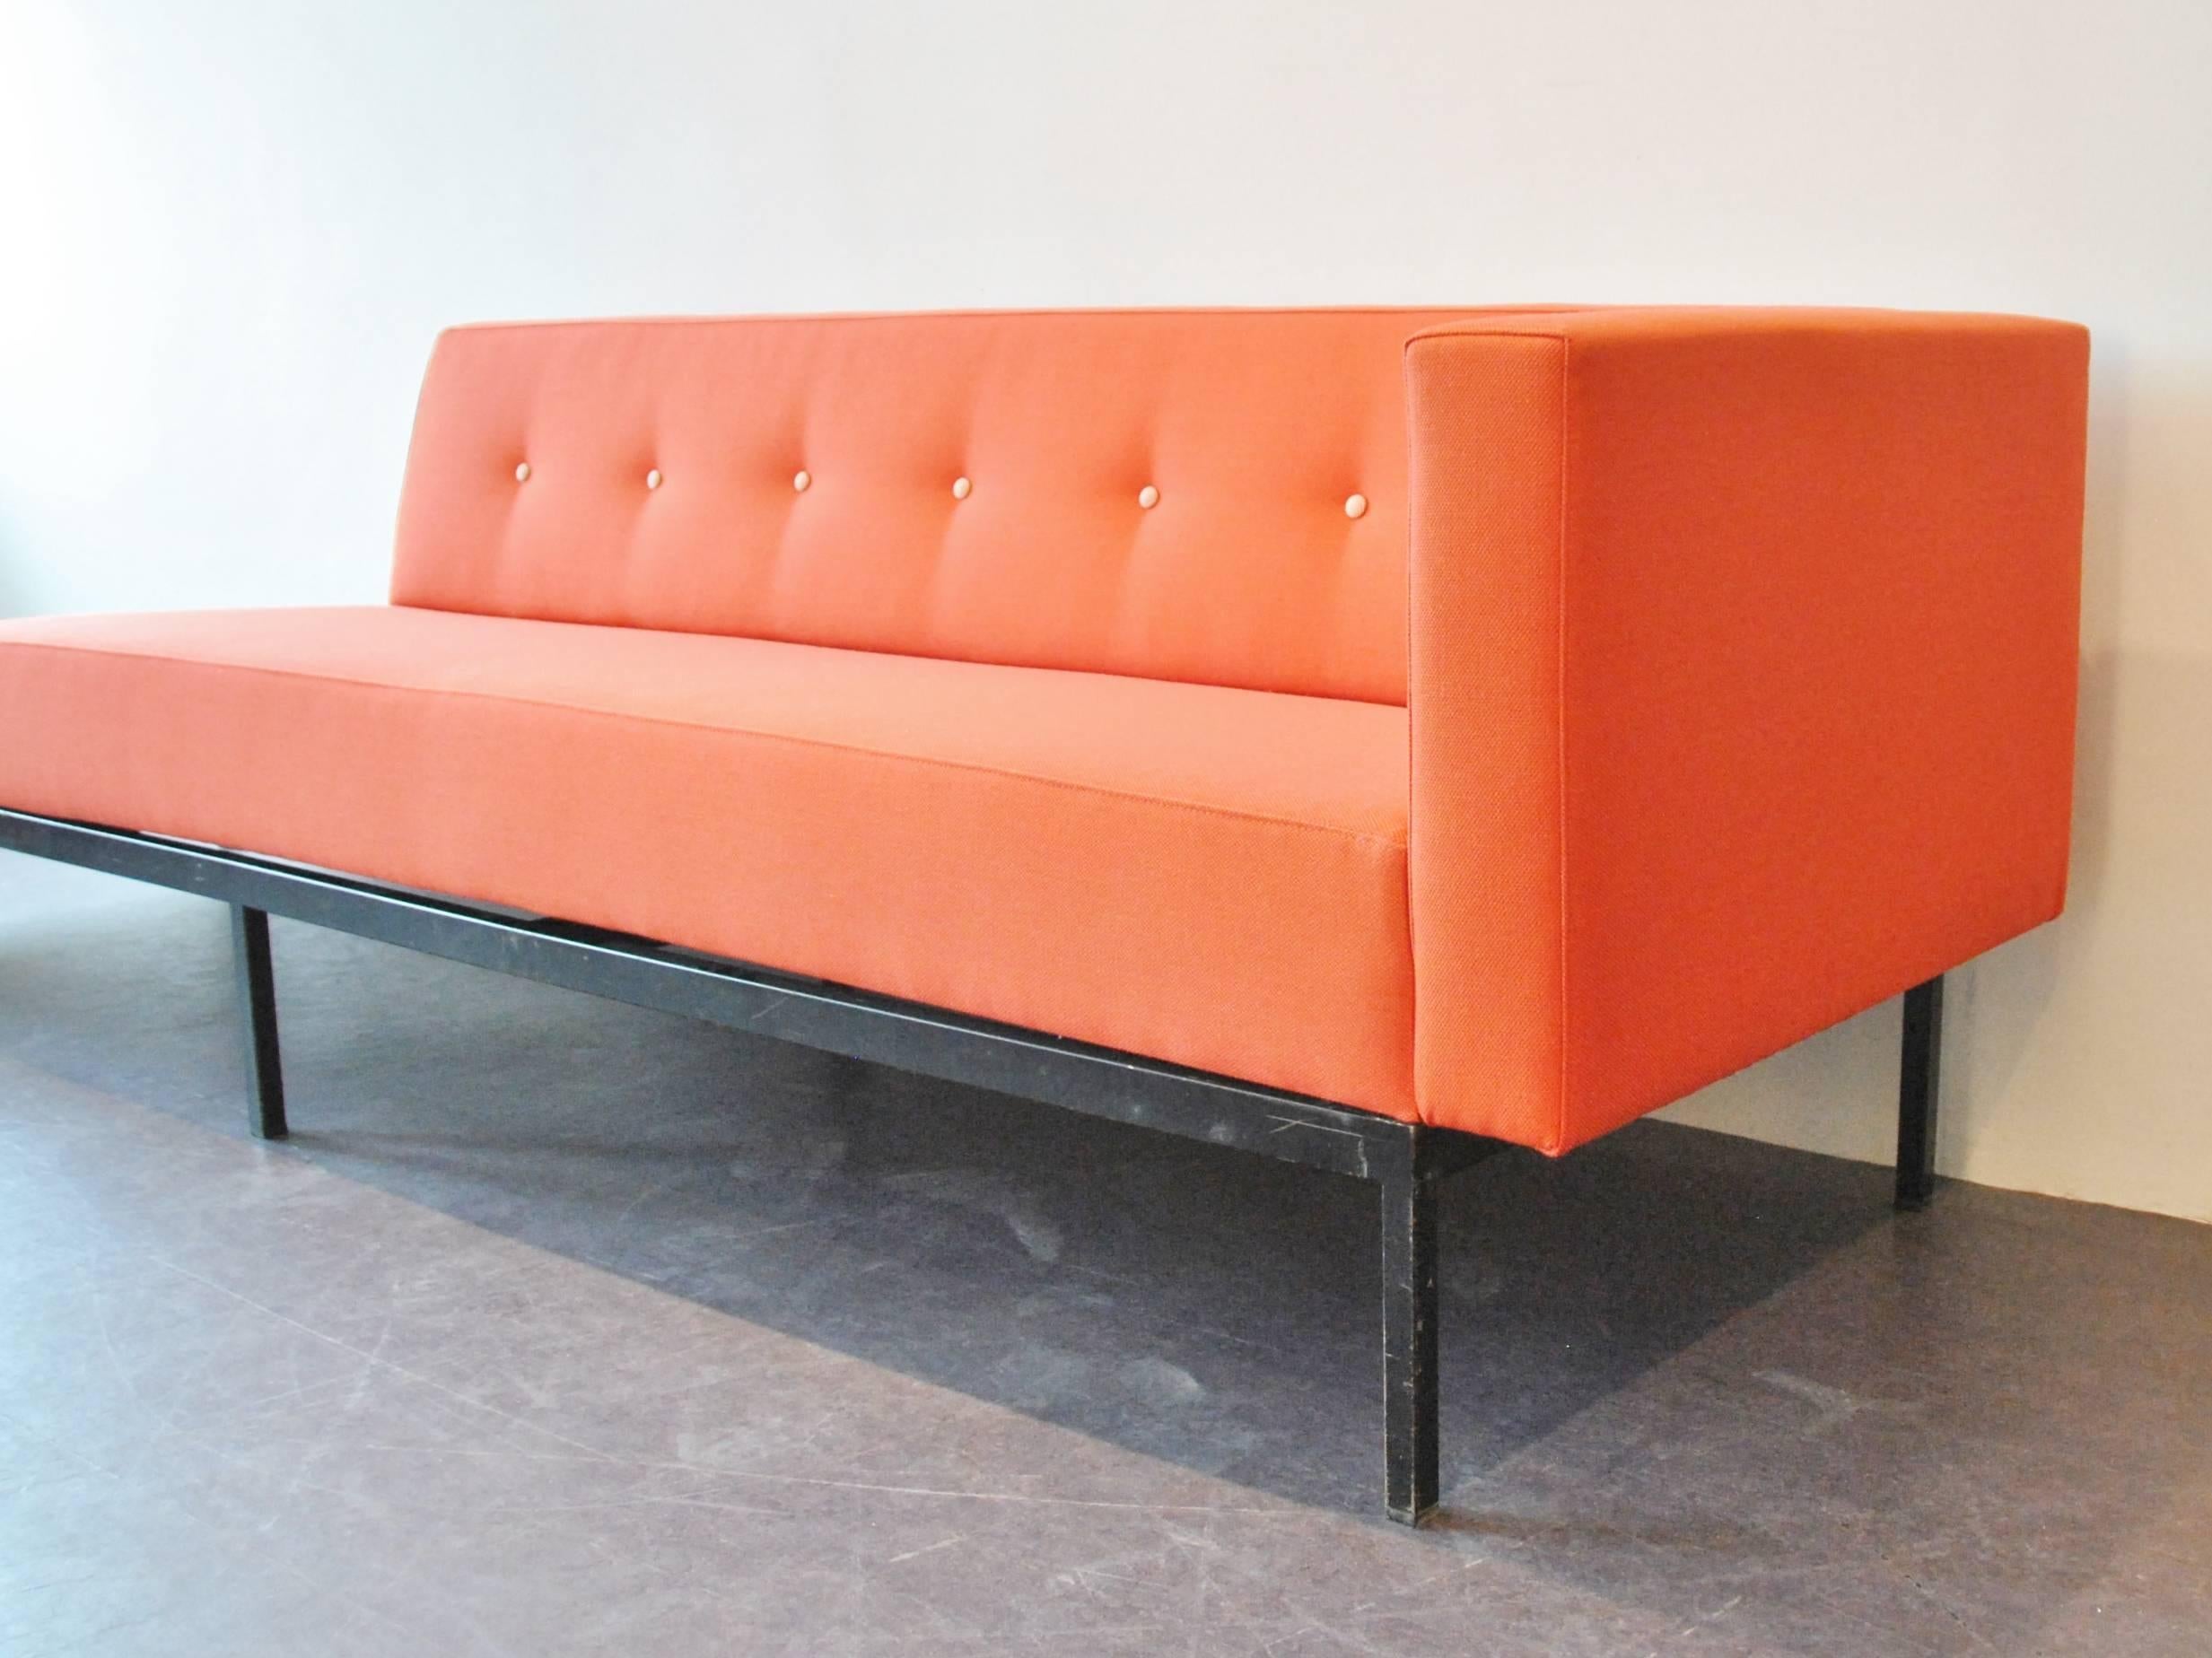 Mid-20th Century 20th Century Modernist Sofa by Kho Liang Ie for Artifort in New Kvadrat Fabric